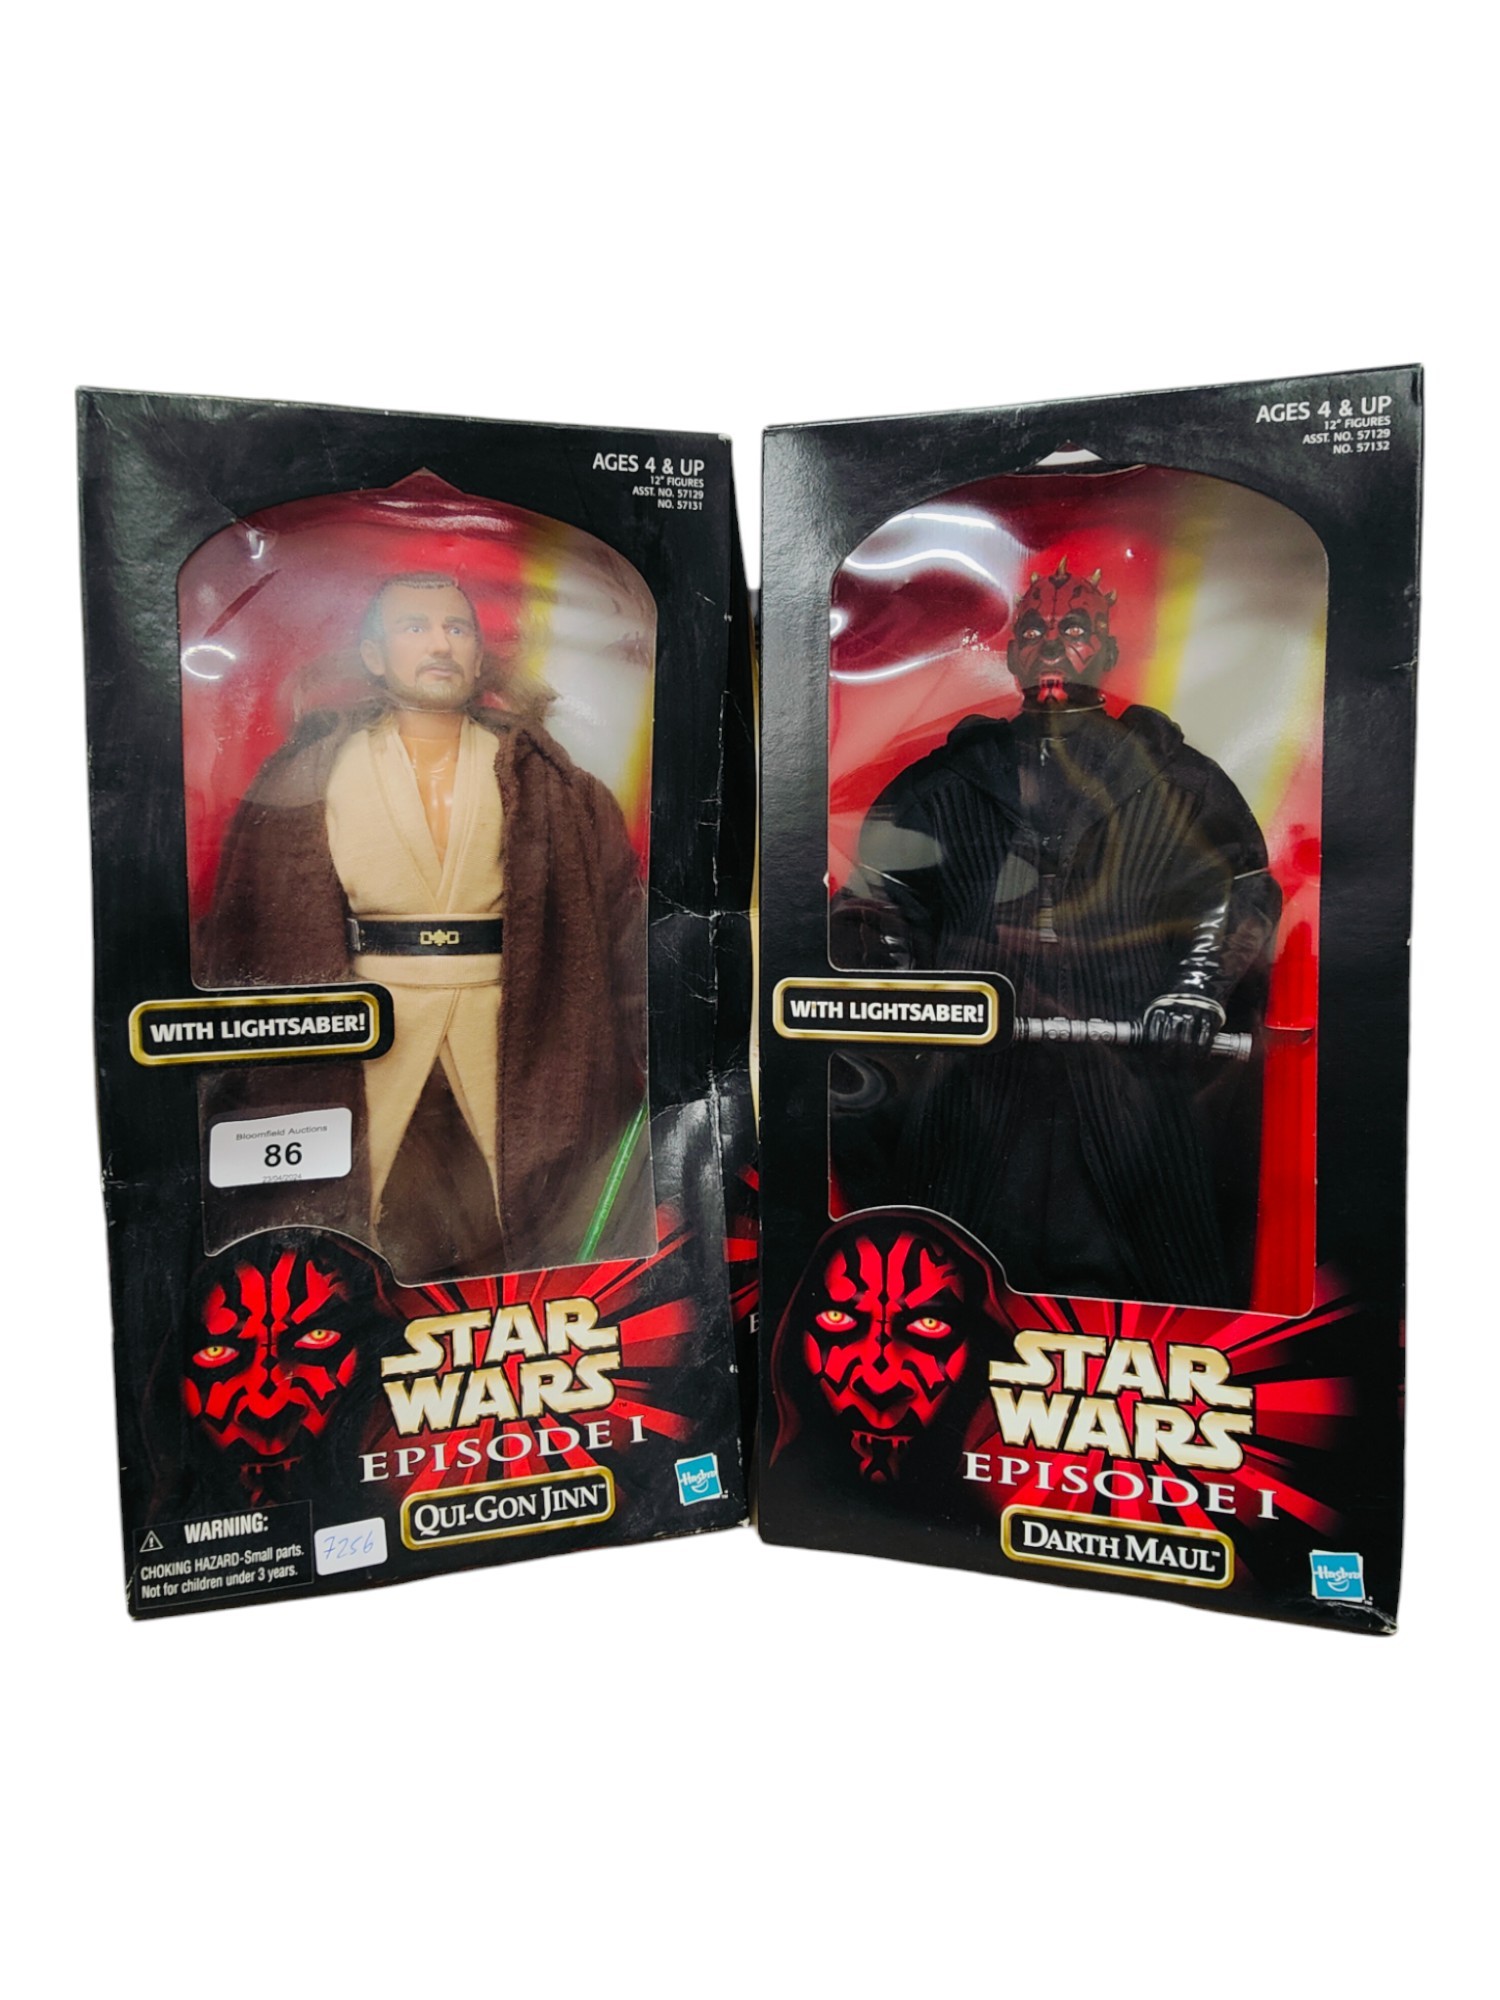 2 LARGE BOXED STAR WARS FIGURES